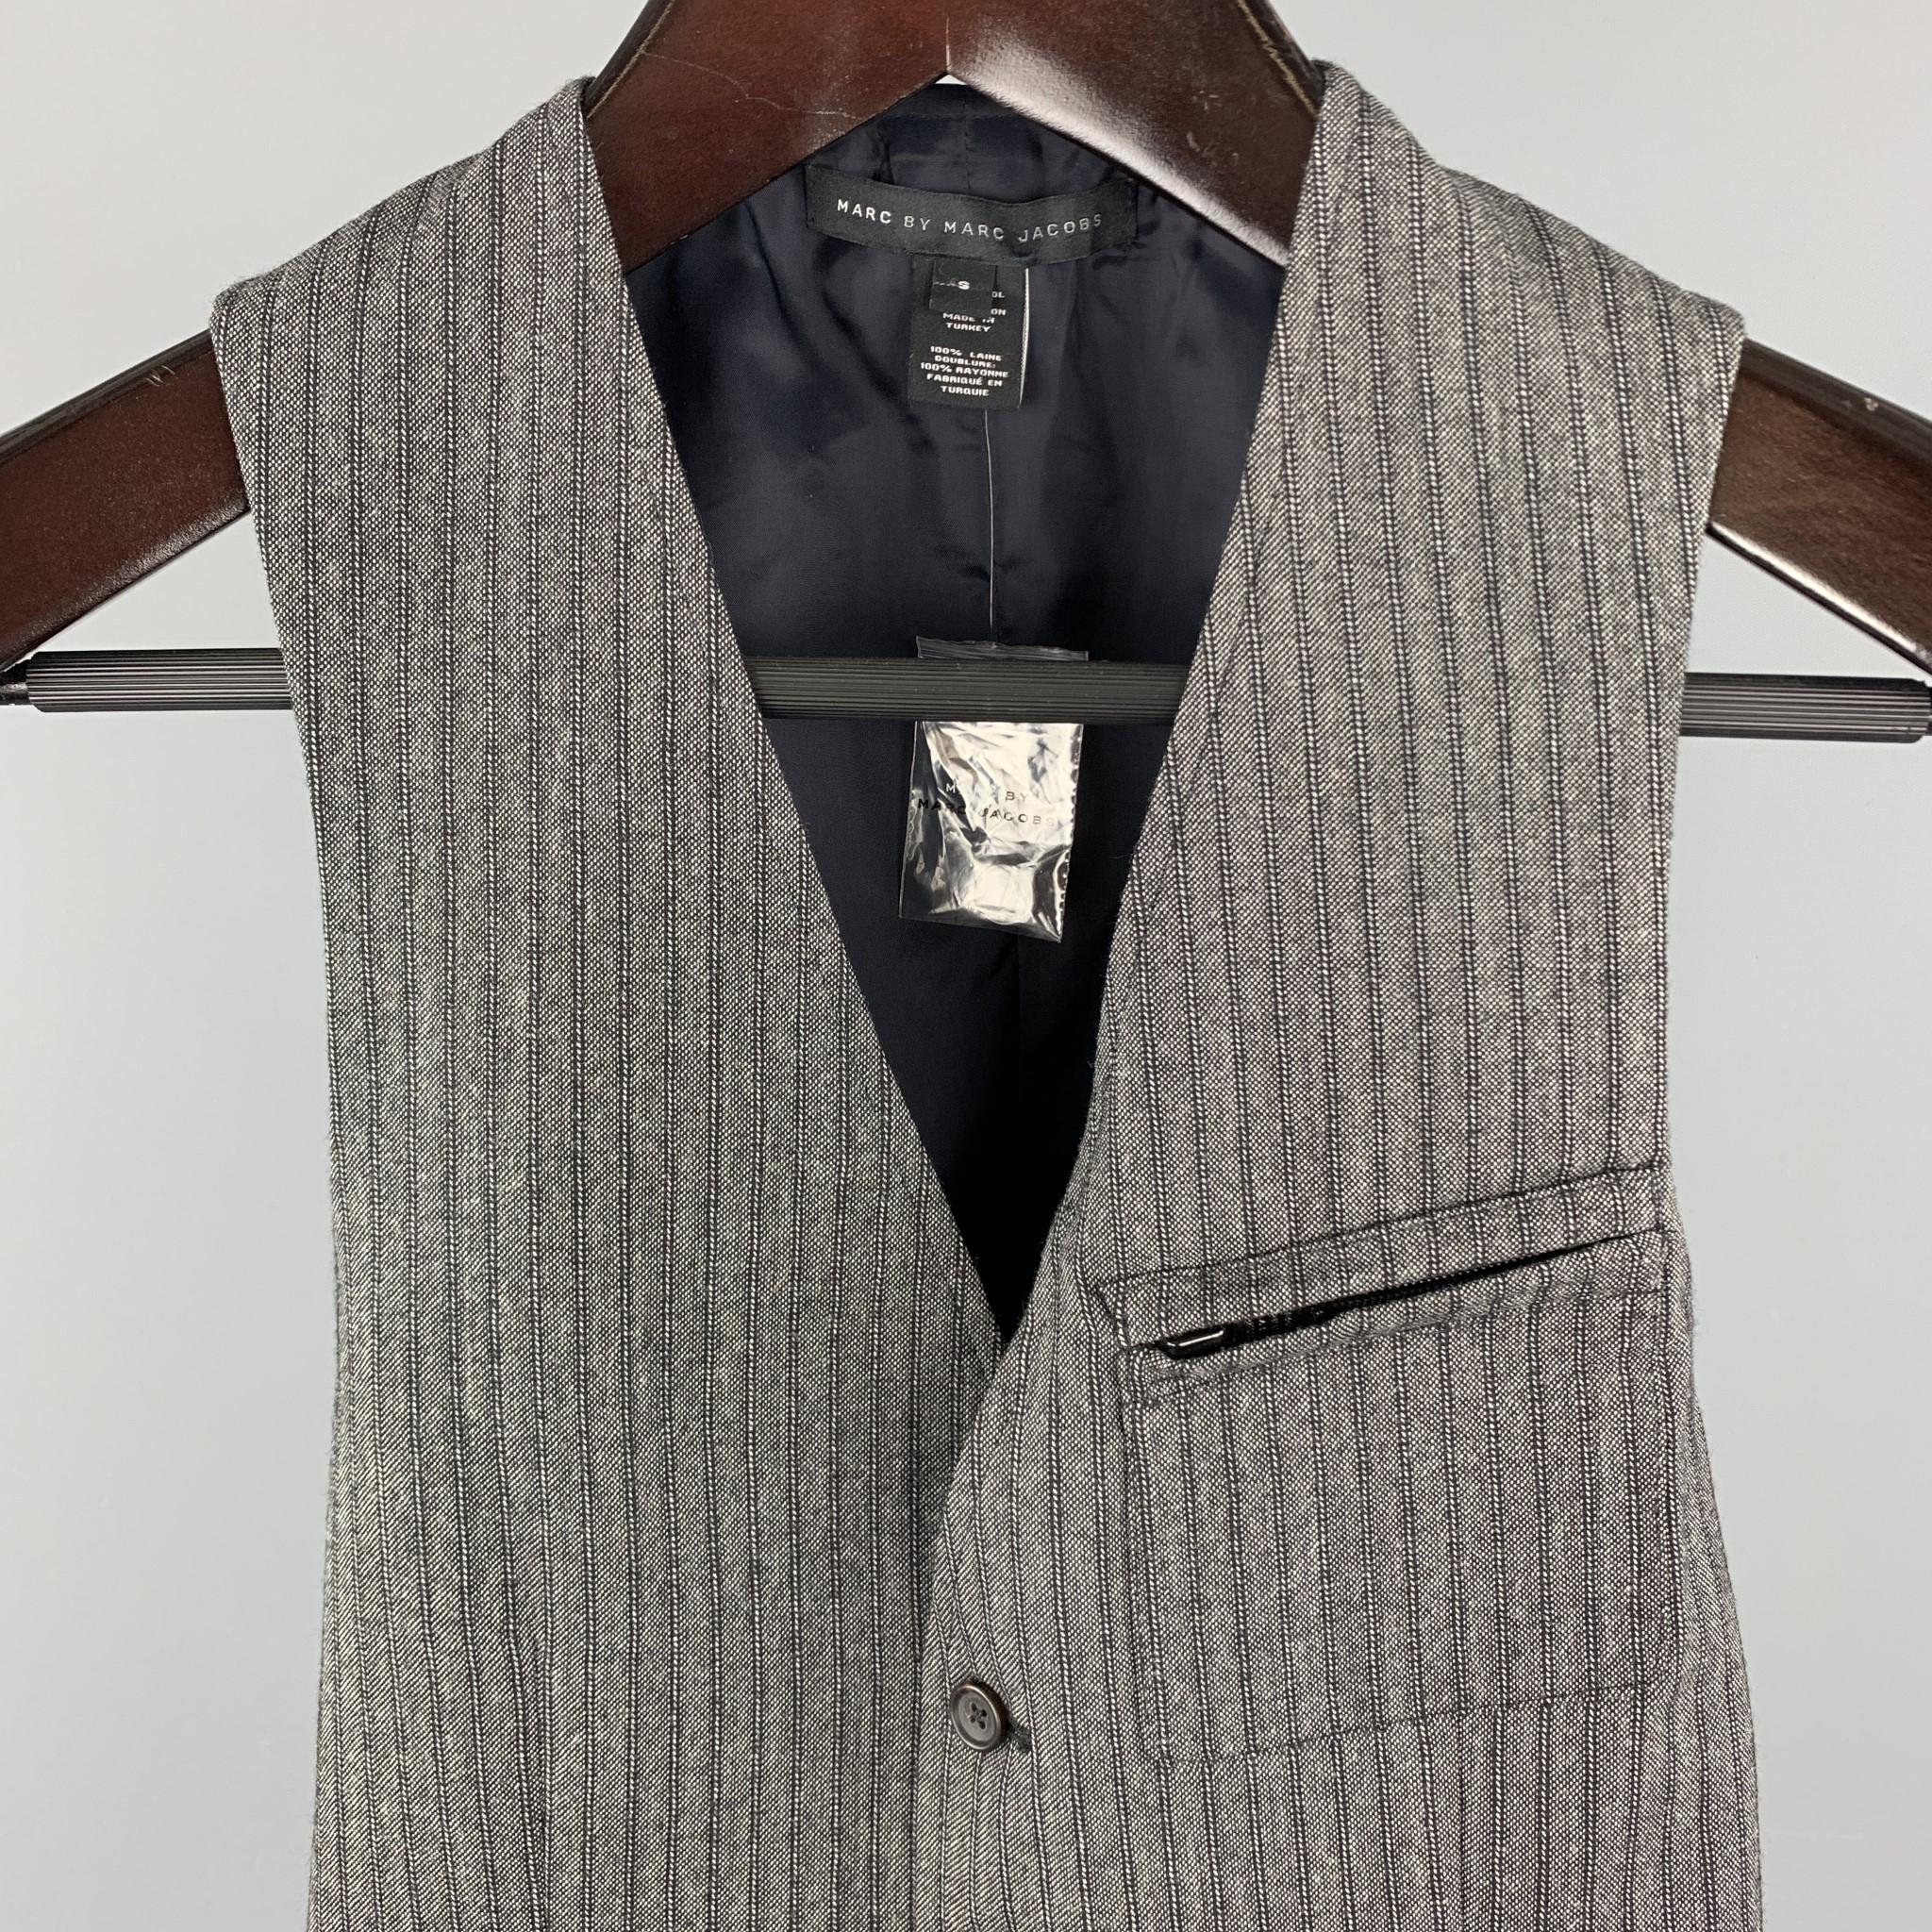 MARC by MARC JACOBS Vest comes in a gray stripe wool material, with a V-neck, a buttoned front, zip and slit pockets, and a striped back.

New without Tags.
Marked: S

Measurements:

Shoulder: 11.5 in. 
Chest: 34 in. 
Length:  24 in. 